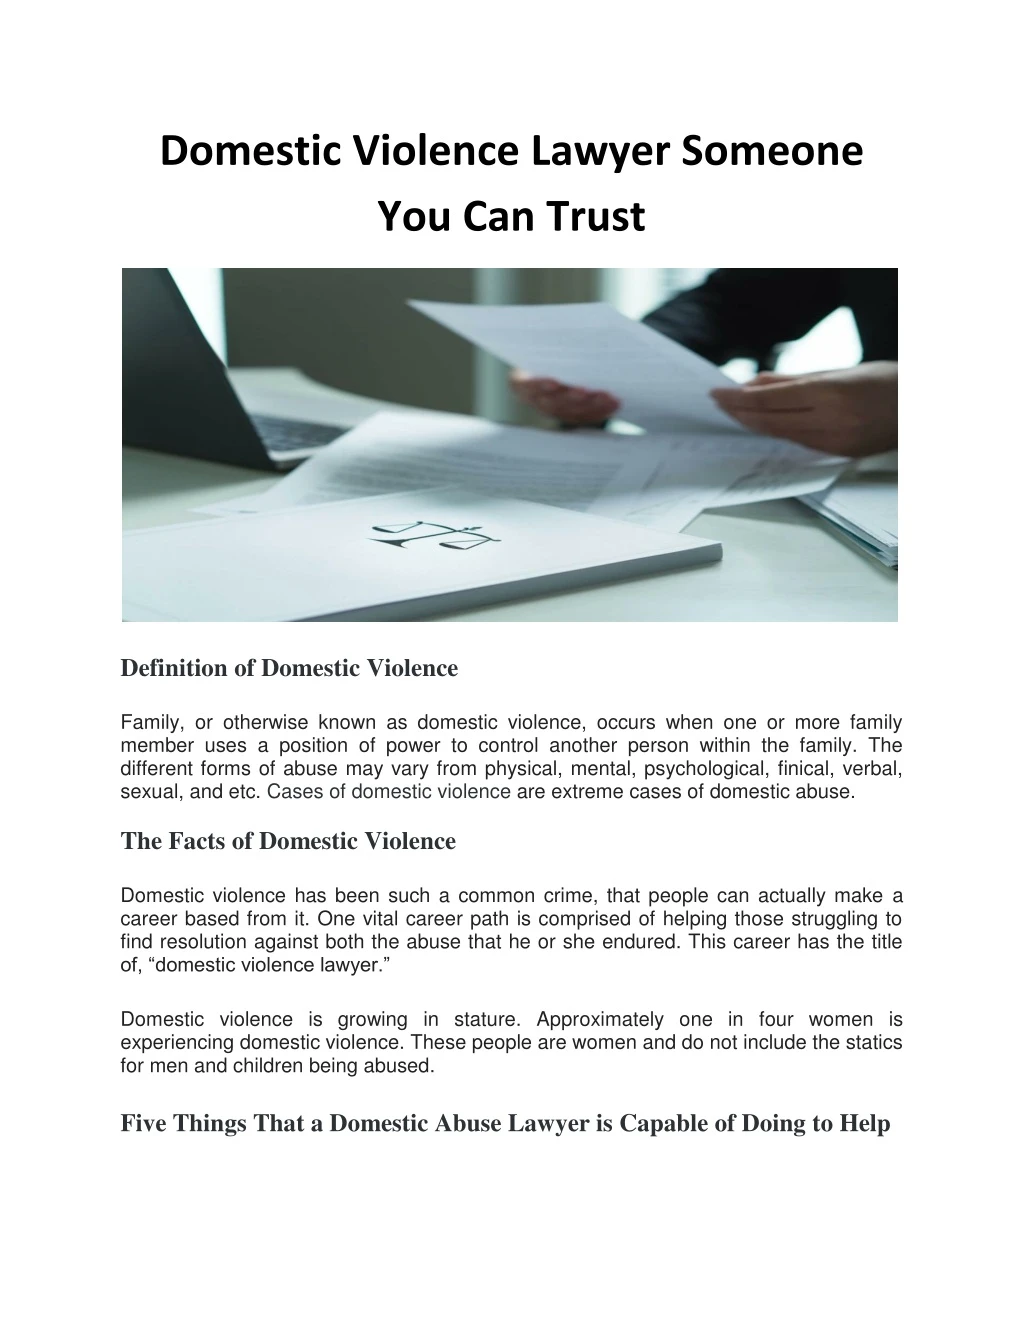 domestic violence lawyer someone you can trust